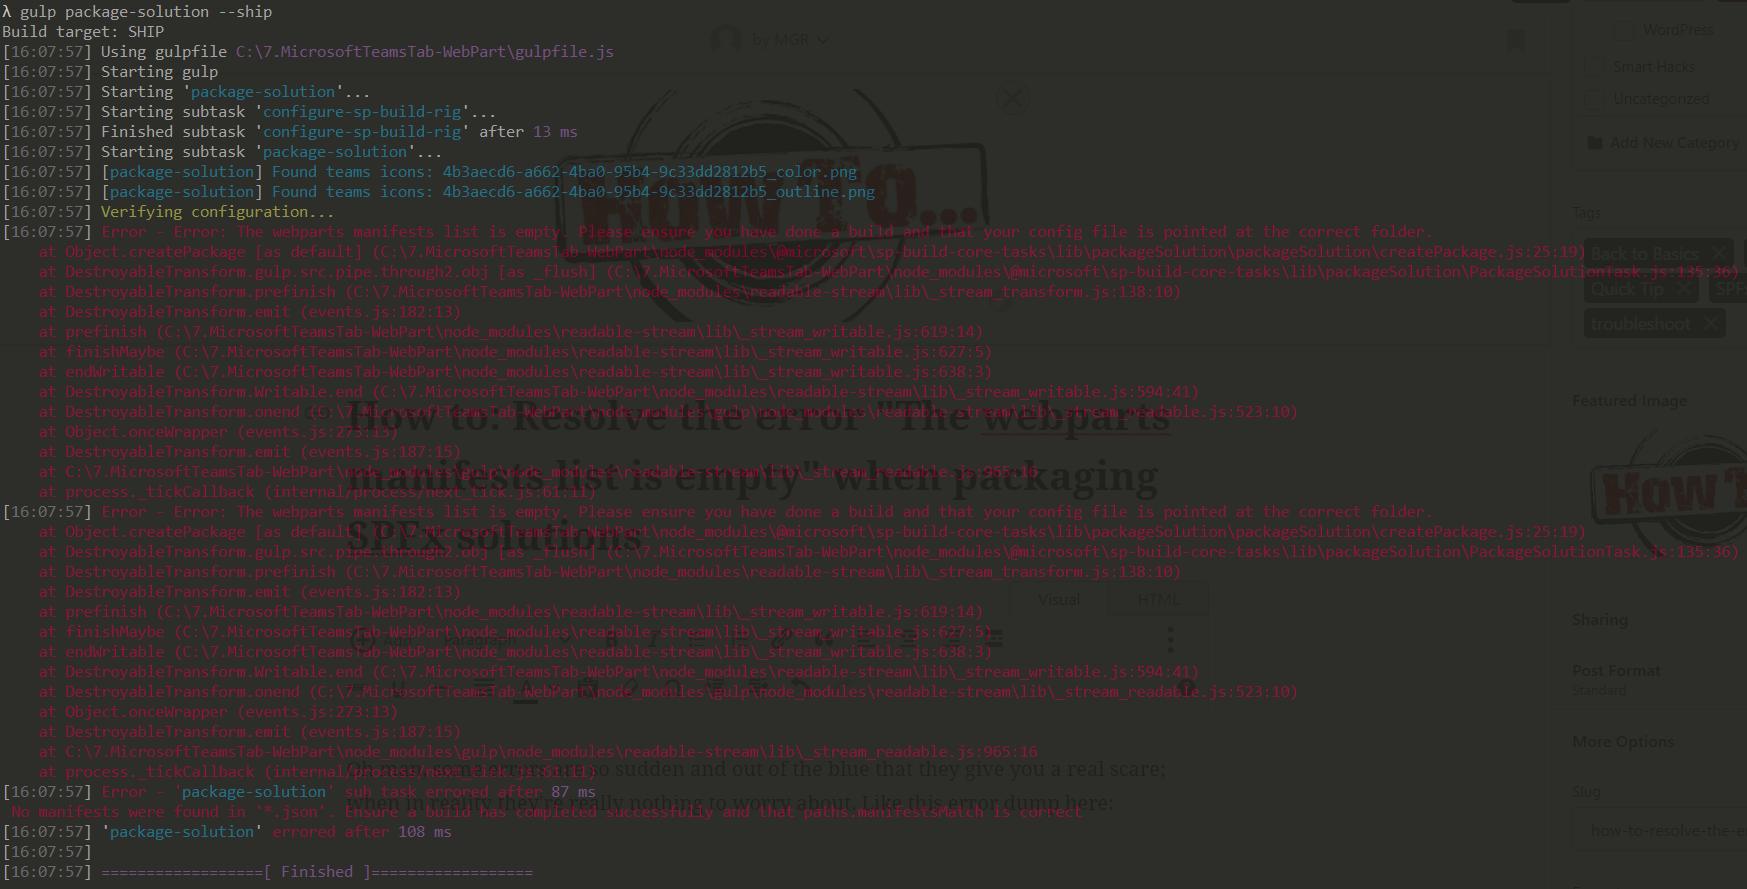 A snapshot of the console, displaying a list of scary looking errors thrown after running gulp package-solution --ship